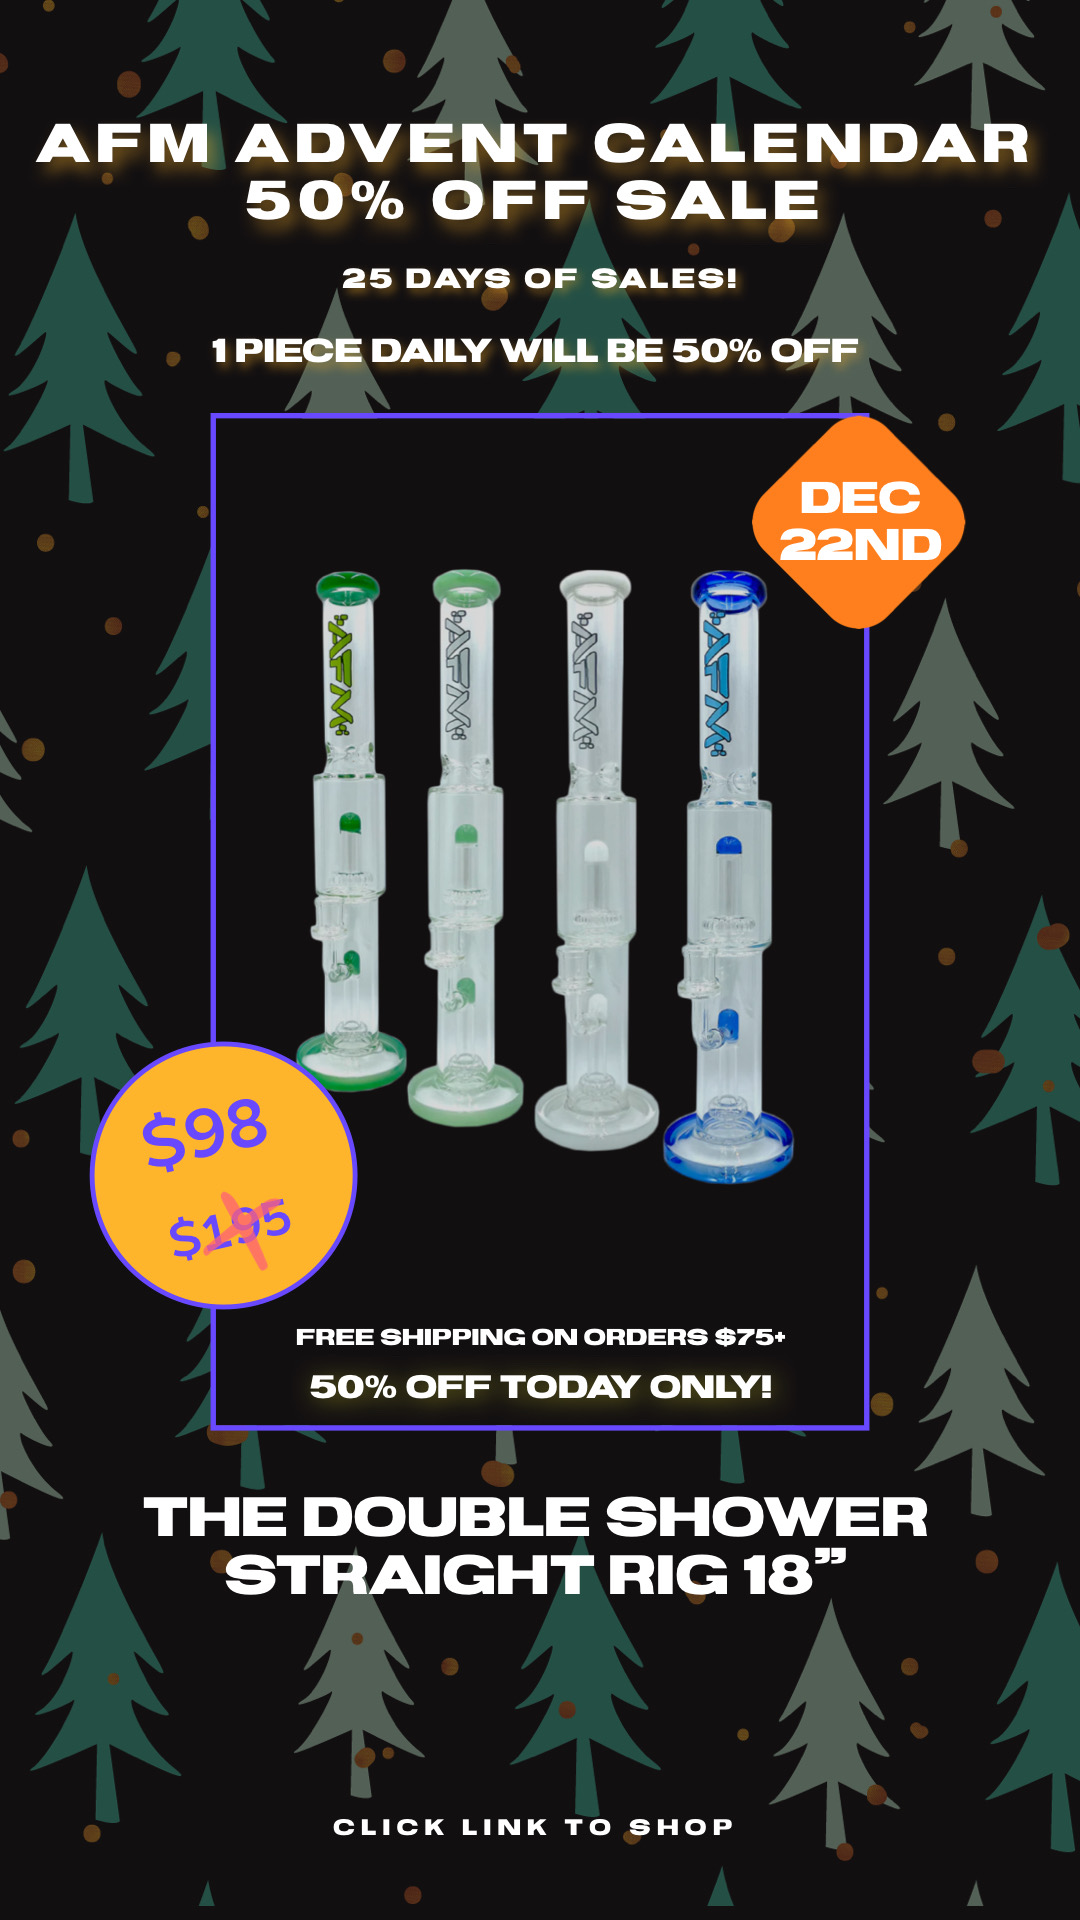 AFM ADVENT CALENDAR 50% OFF SALE 25 DAYS OF SALES! 1PIECE DAILY WILL BE 50% OFF FREE SHIPPING ON ORDERS $75 50% OFF TODAY ONLY! THE DOUBLE SHOWER STRAIGHT RIG 18 CLICK LINK TO SHOP 